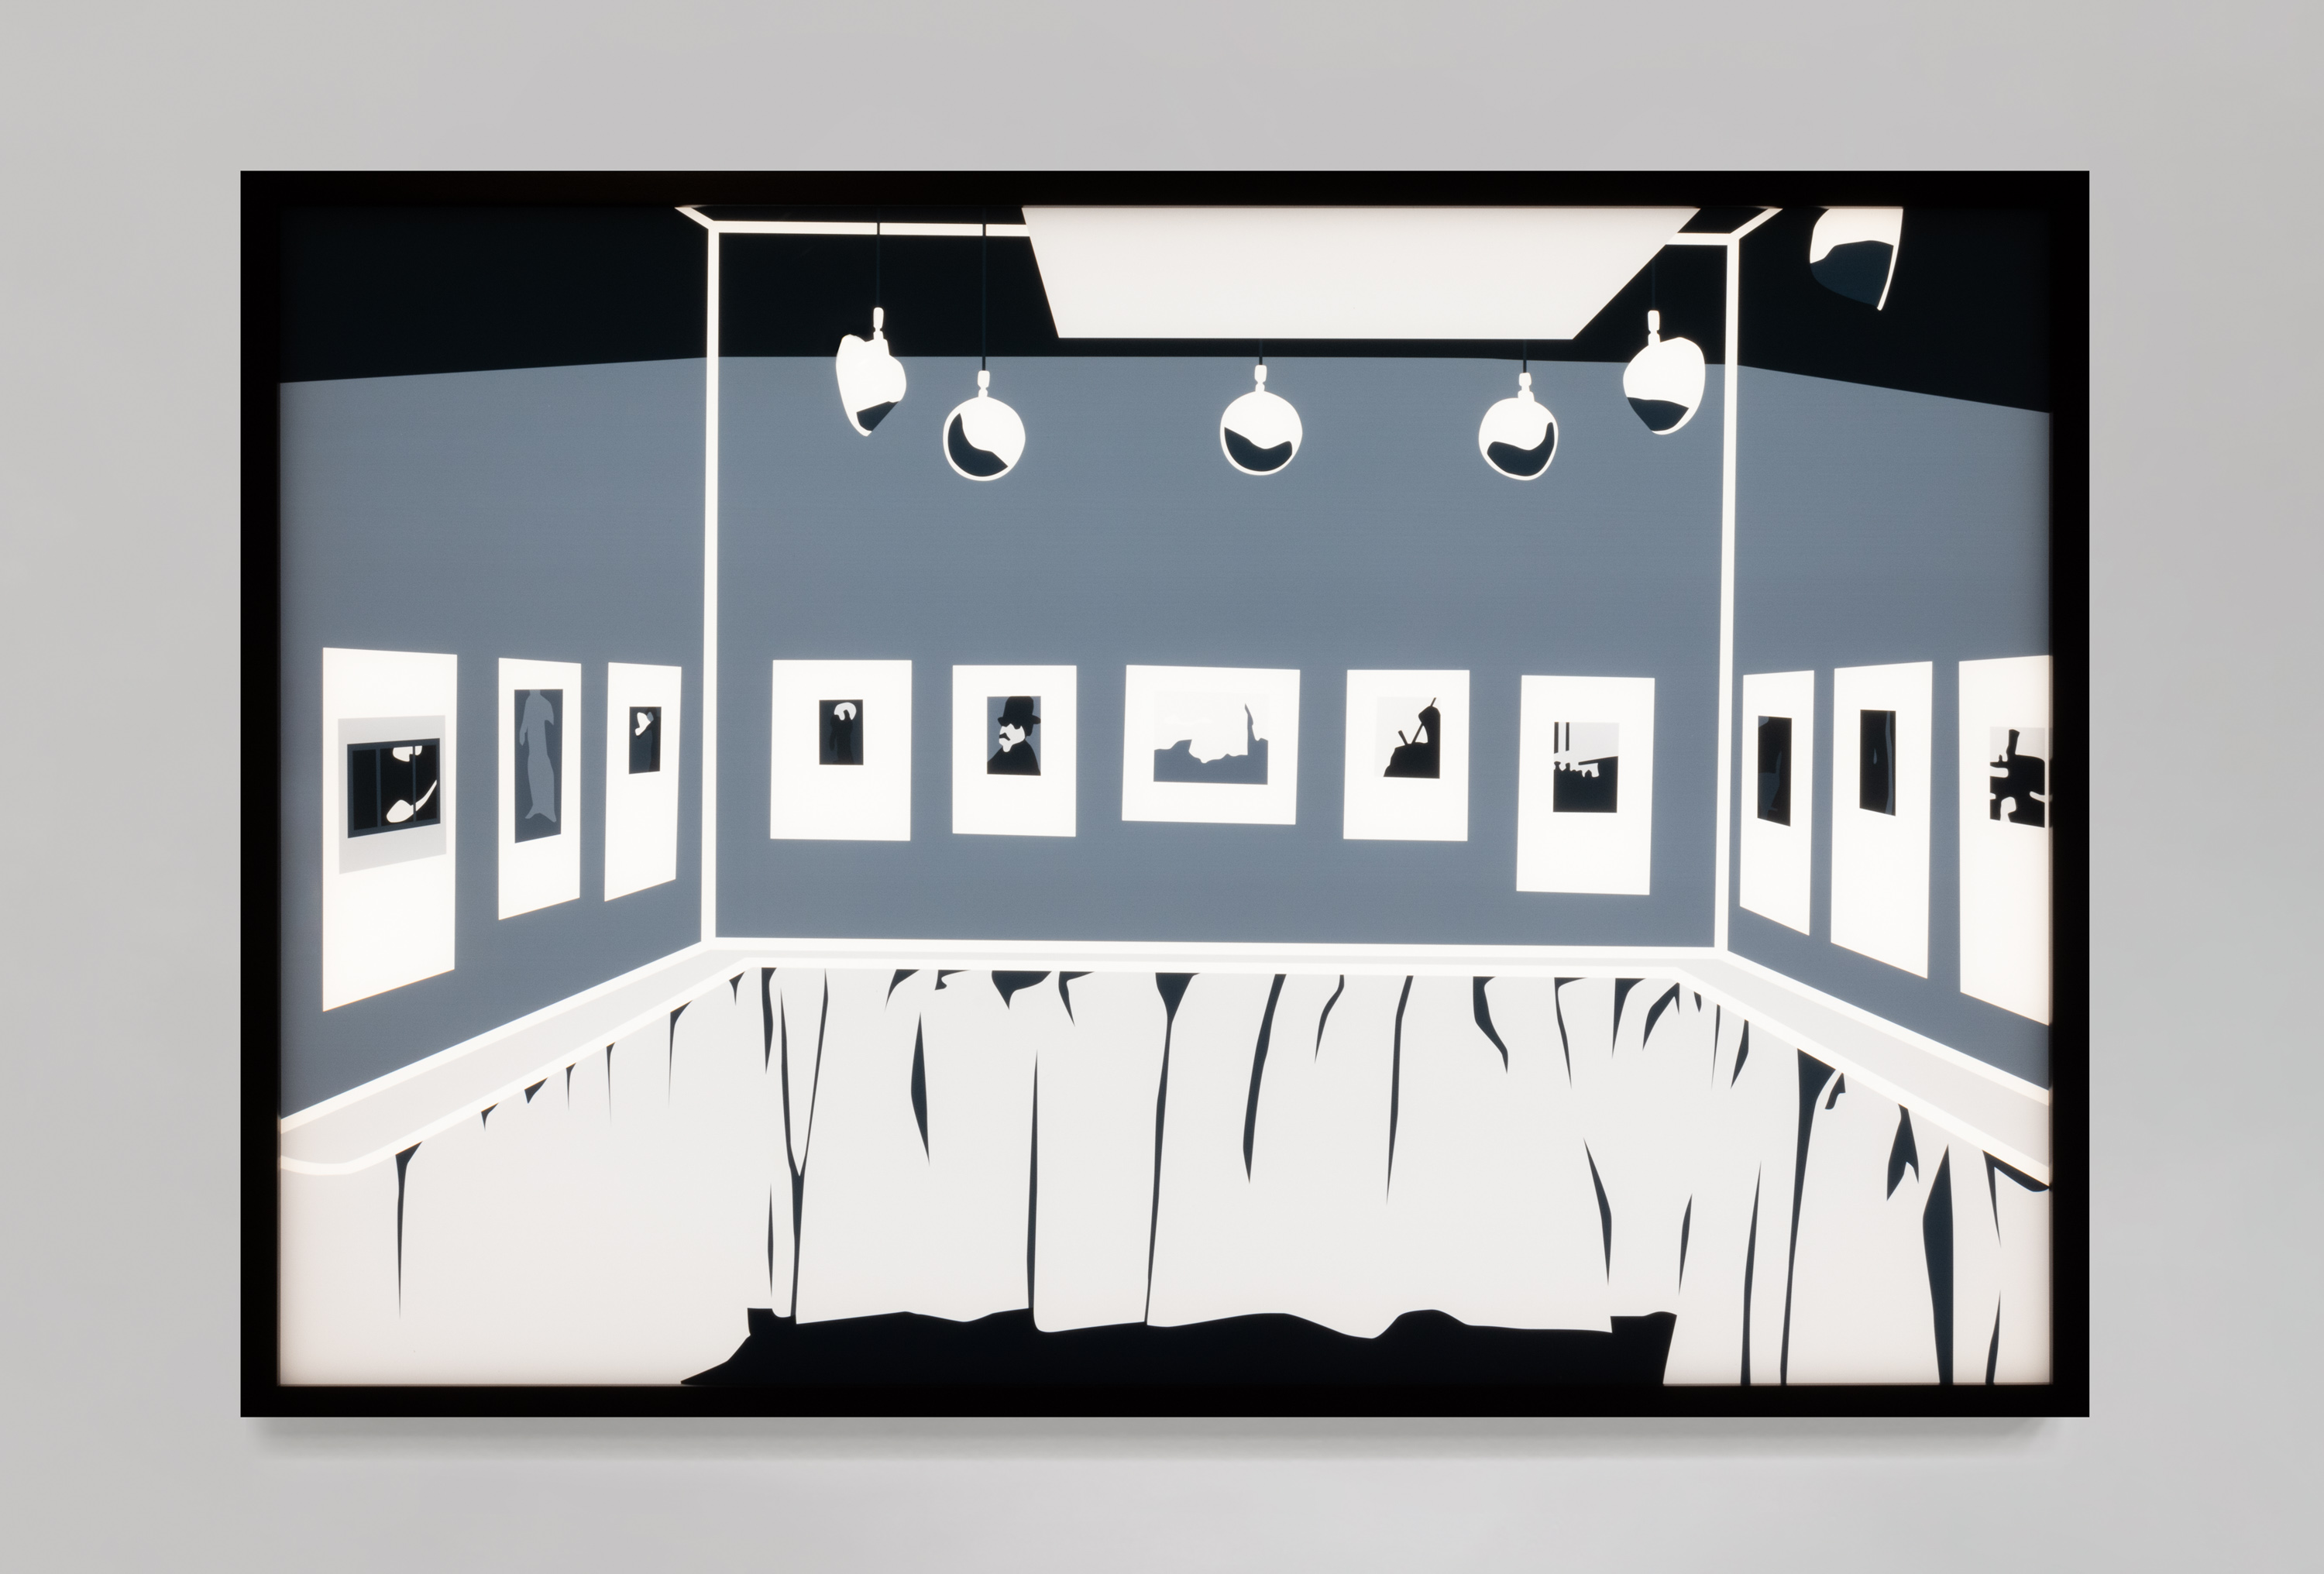 Color image of a black and white transparency on a light box depicting an exhibition of black and white photographs